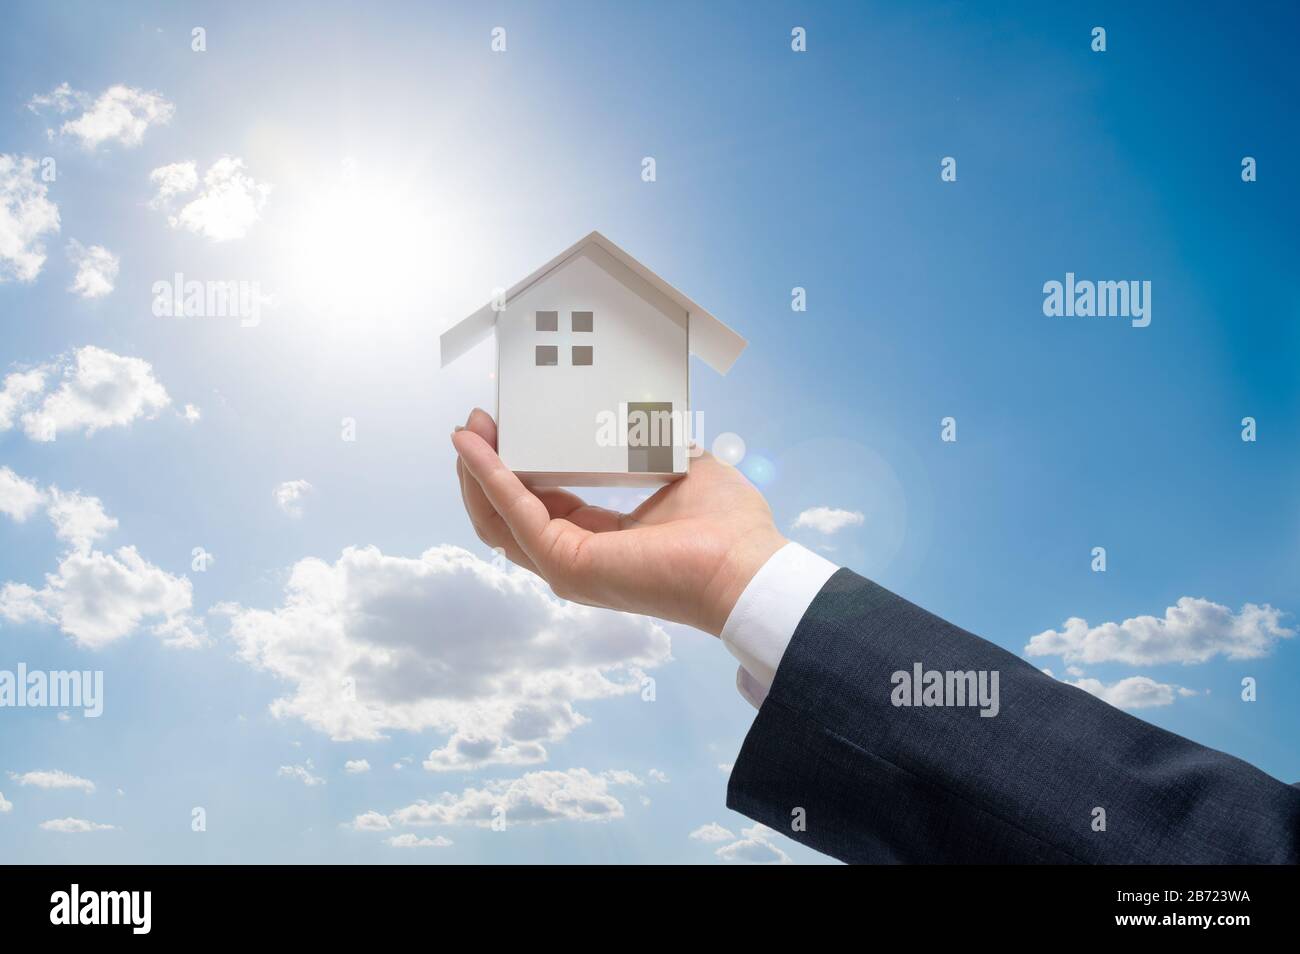 Businessman with house model on hand. Real estate concept Stock Photo